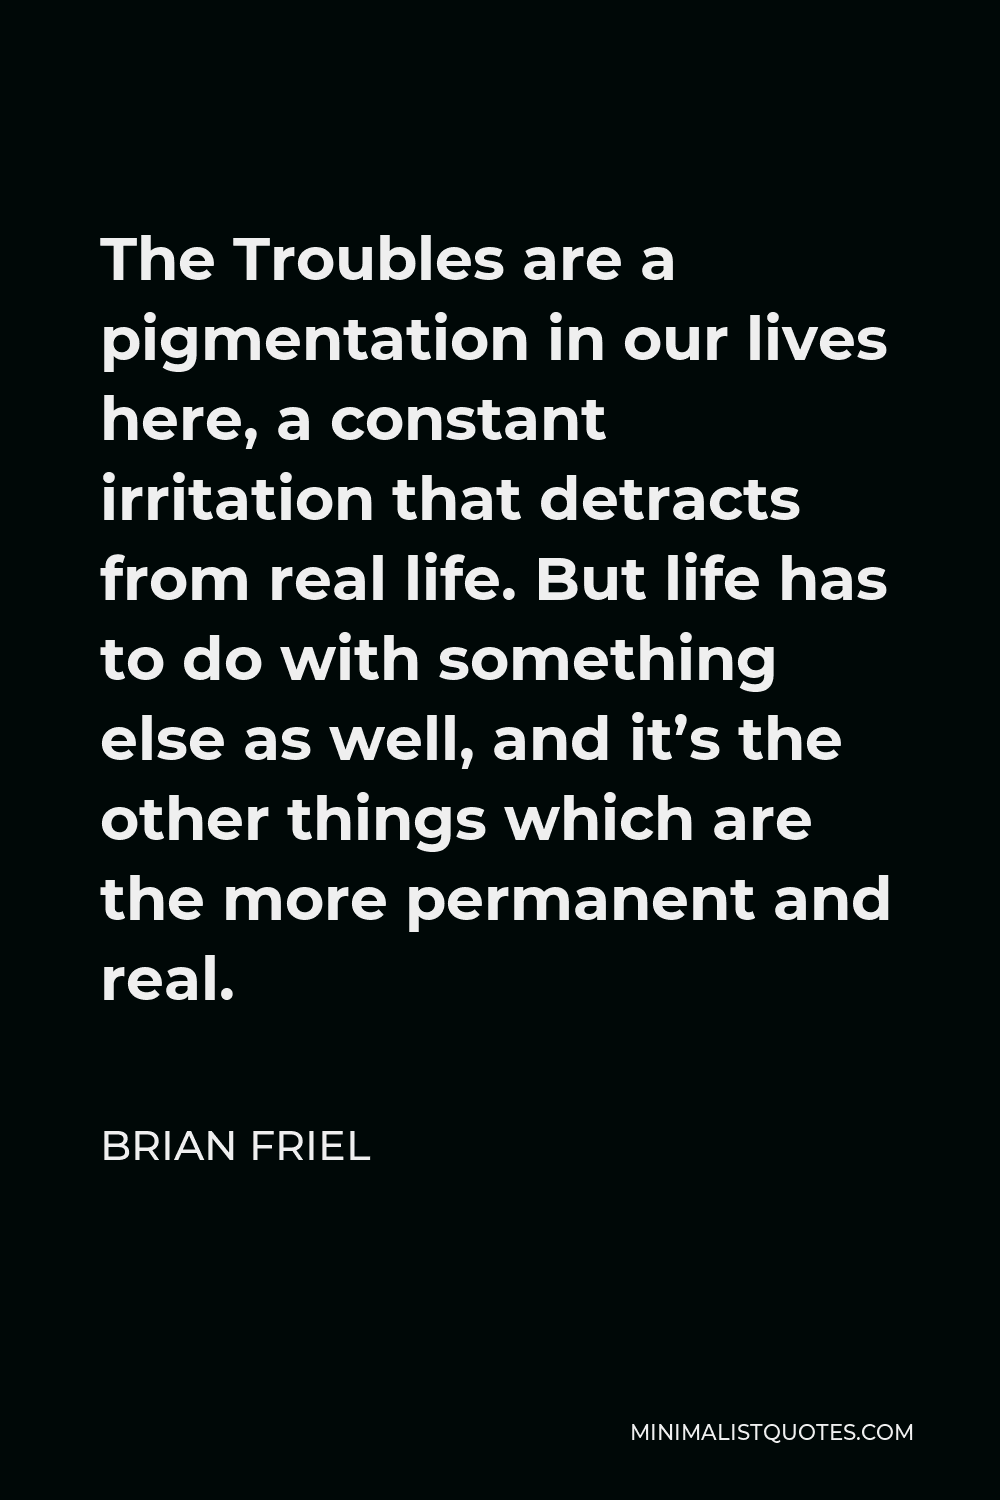 Brian Friel Quote - The Troubles are a pigmentation in our lives here, a constant irritation that detracts from real life. But life has to do with something else as well, and it’s the other things which are the more permanent and real.